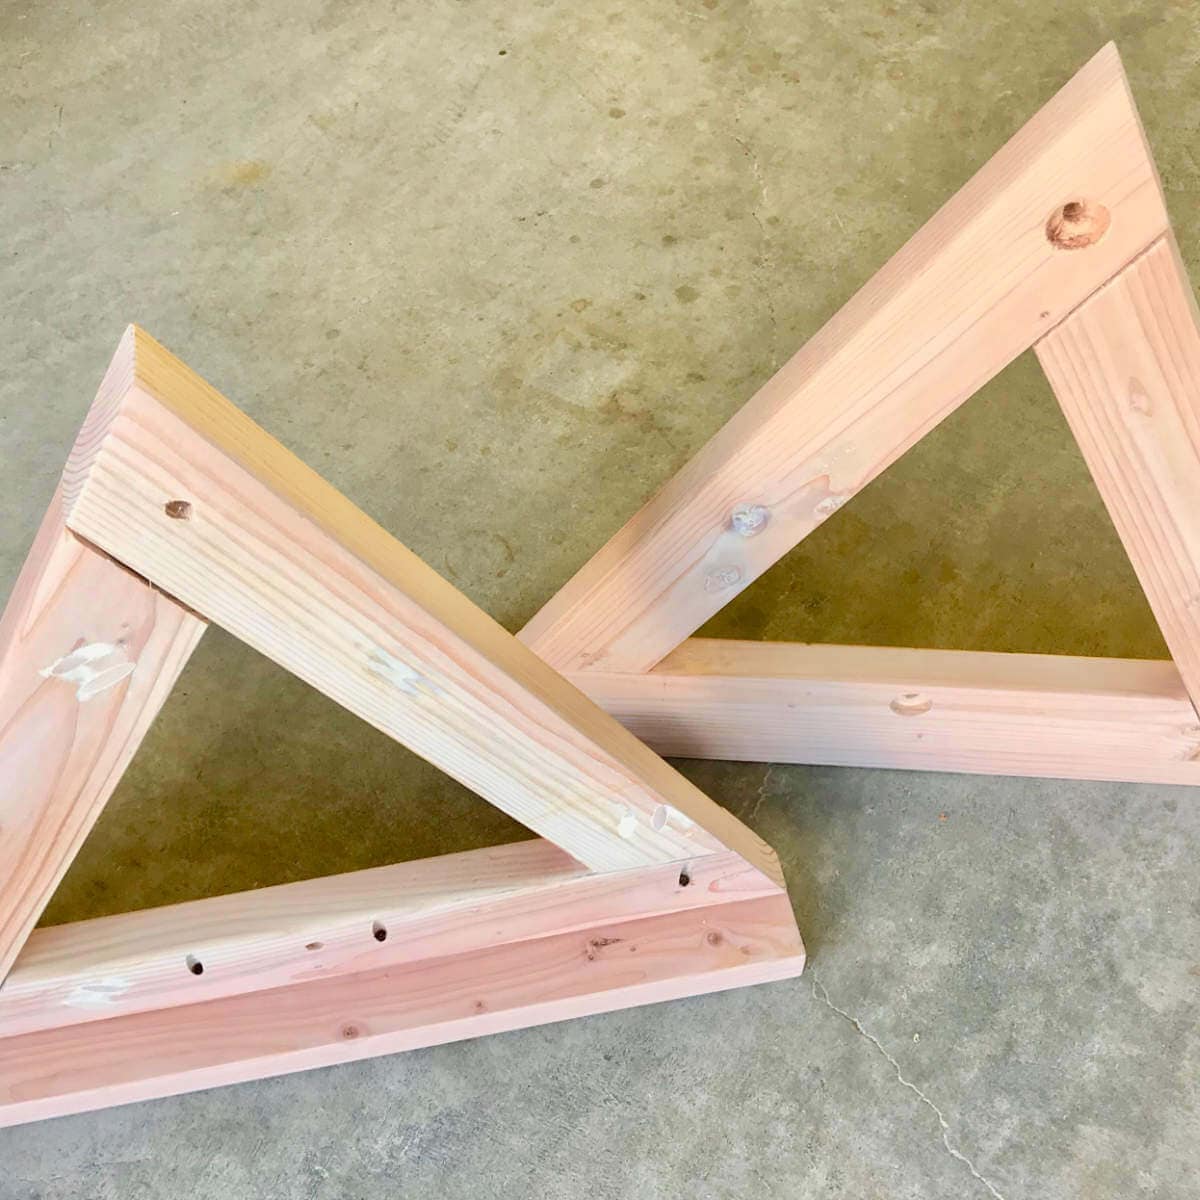 Triangle wood legs build out of 2 x 4s and pocket holes.